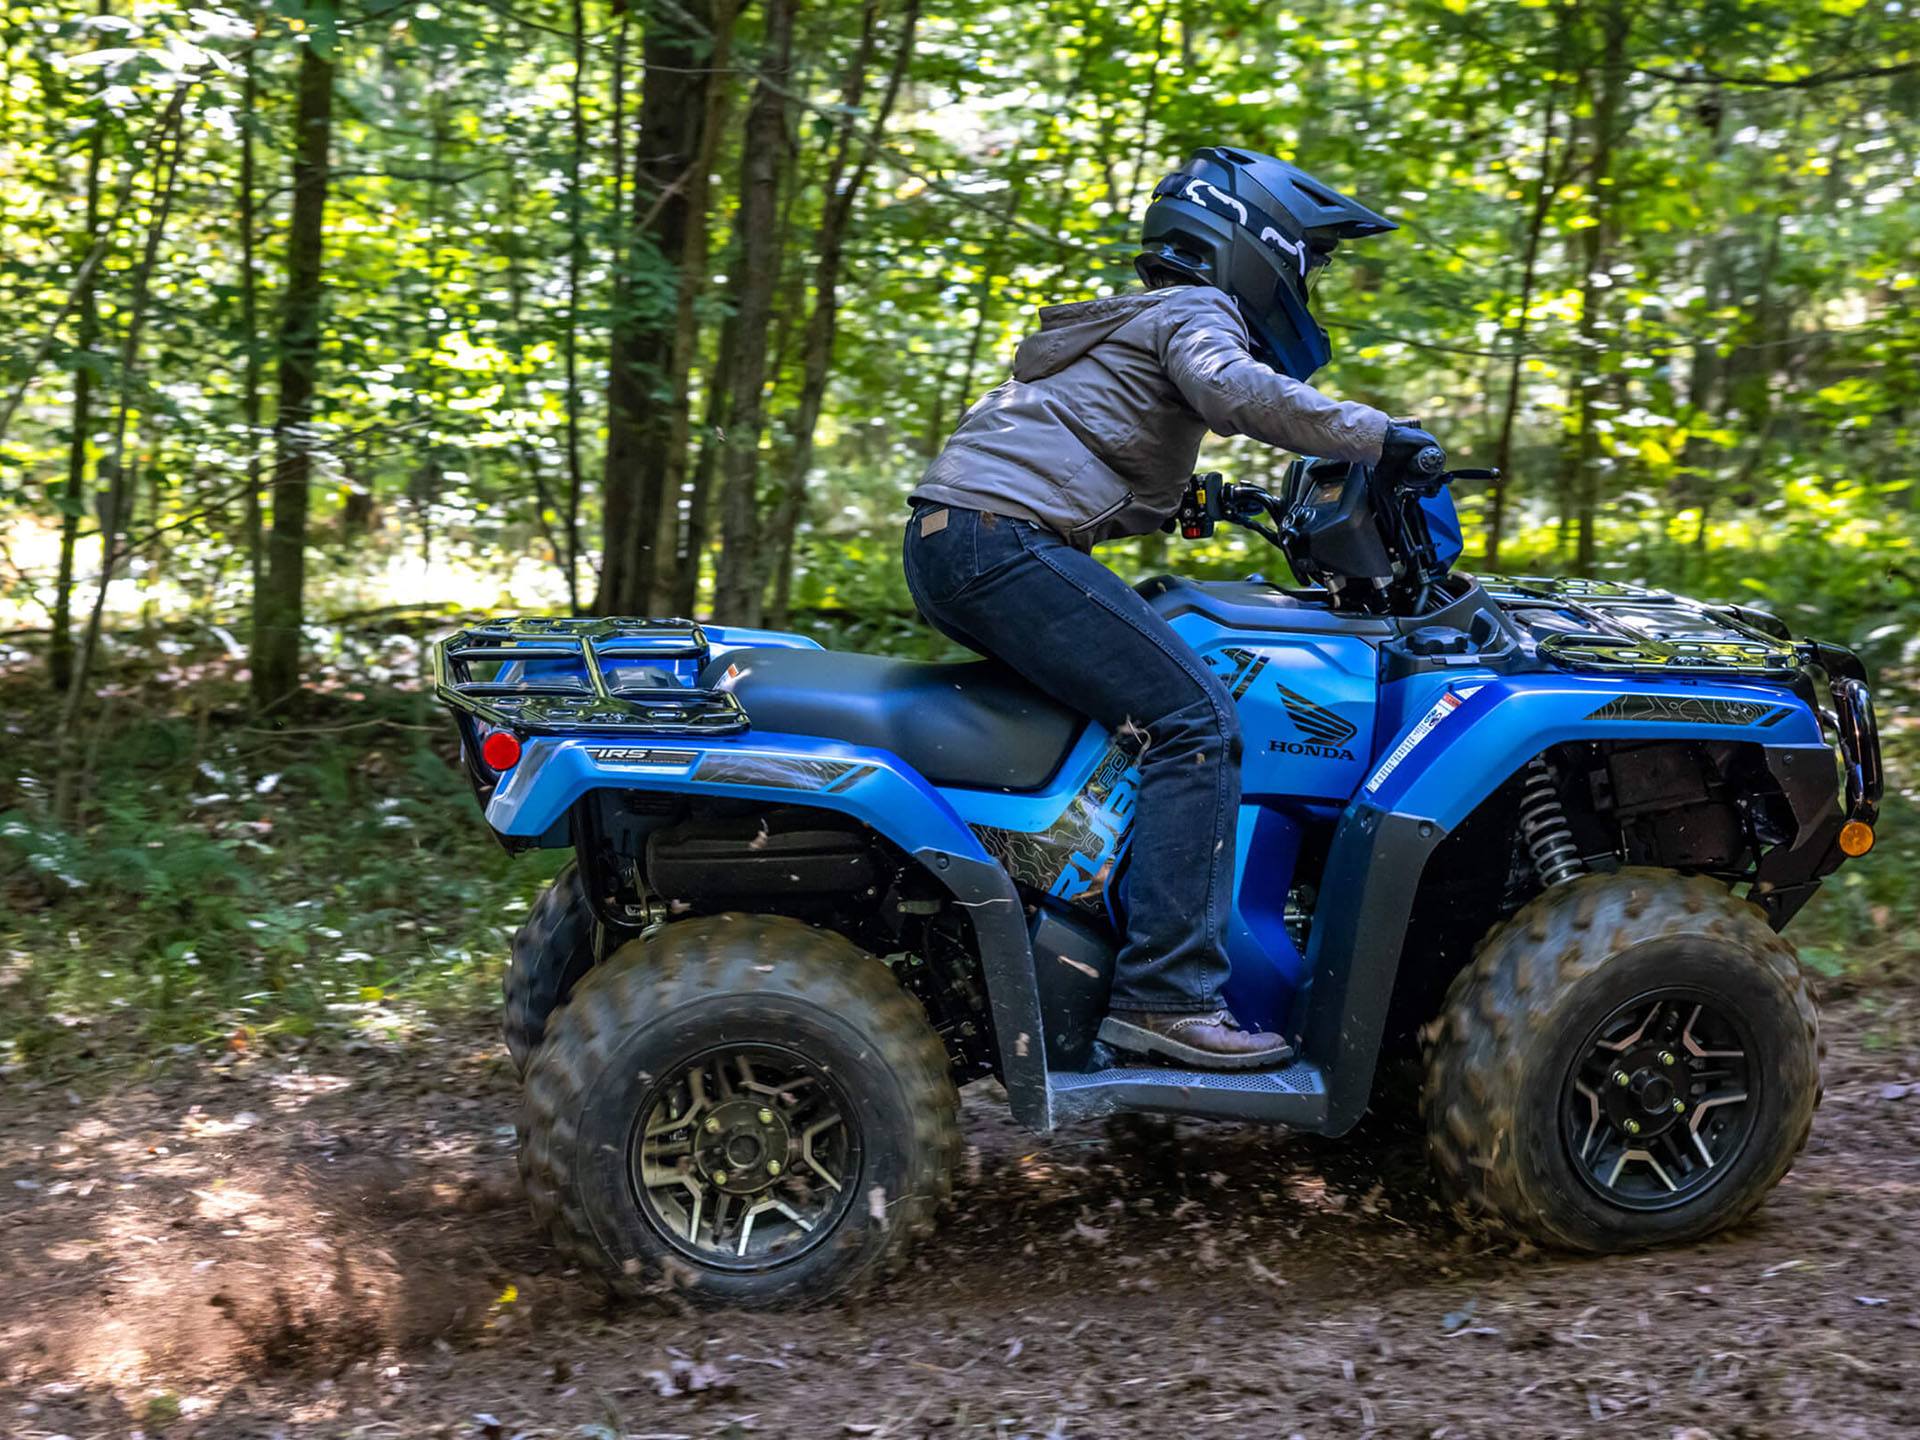 2023 Honda FourTrax Foreman Rubicon 4x4 Automatic DCT EPS Deluxe in Sterling, Illinois - Photo 11